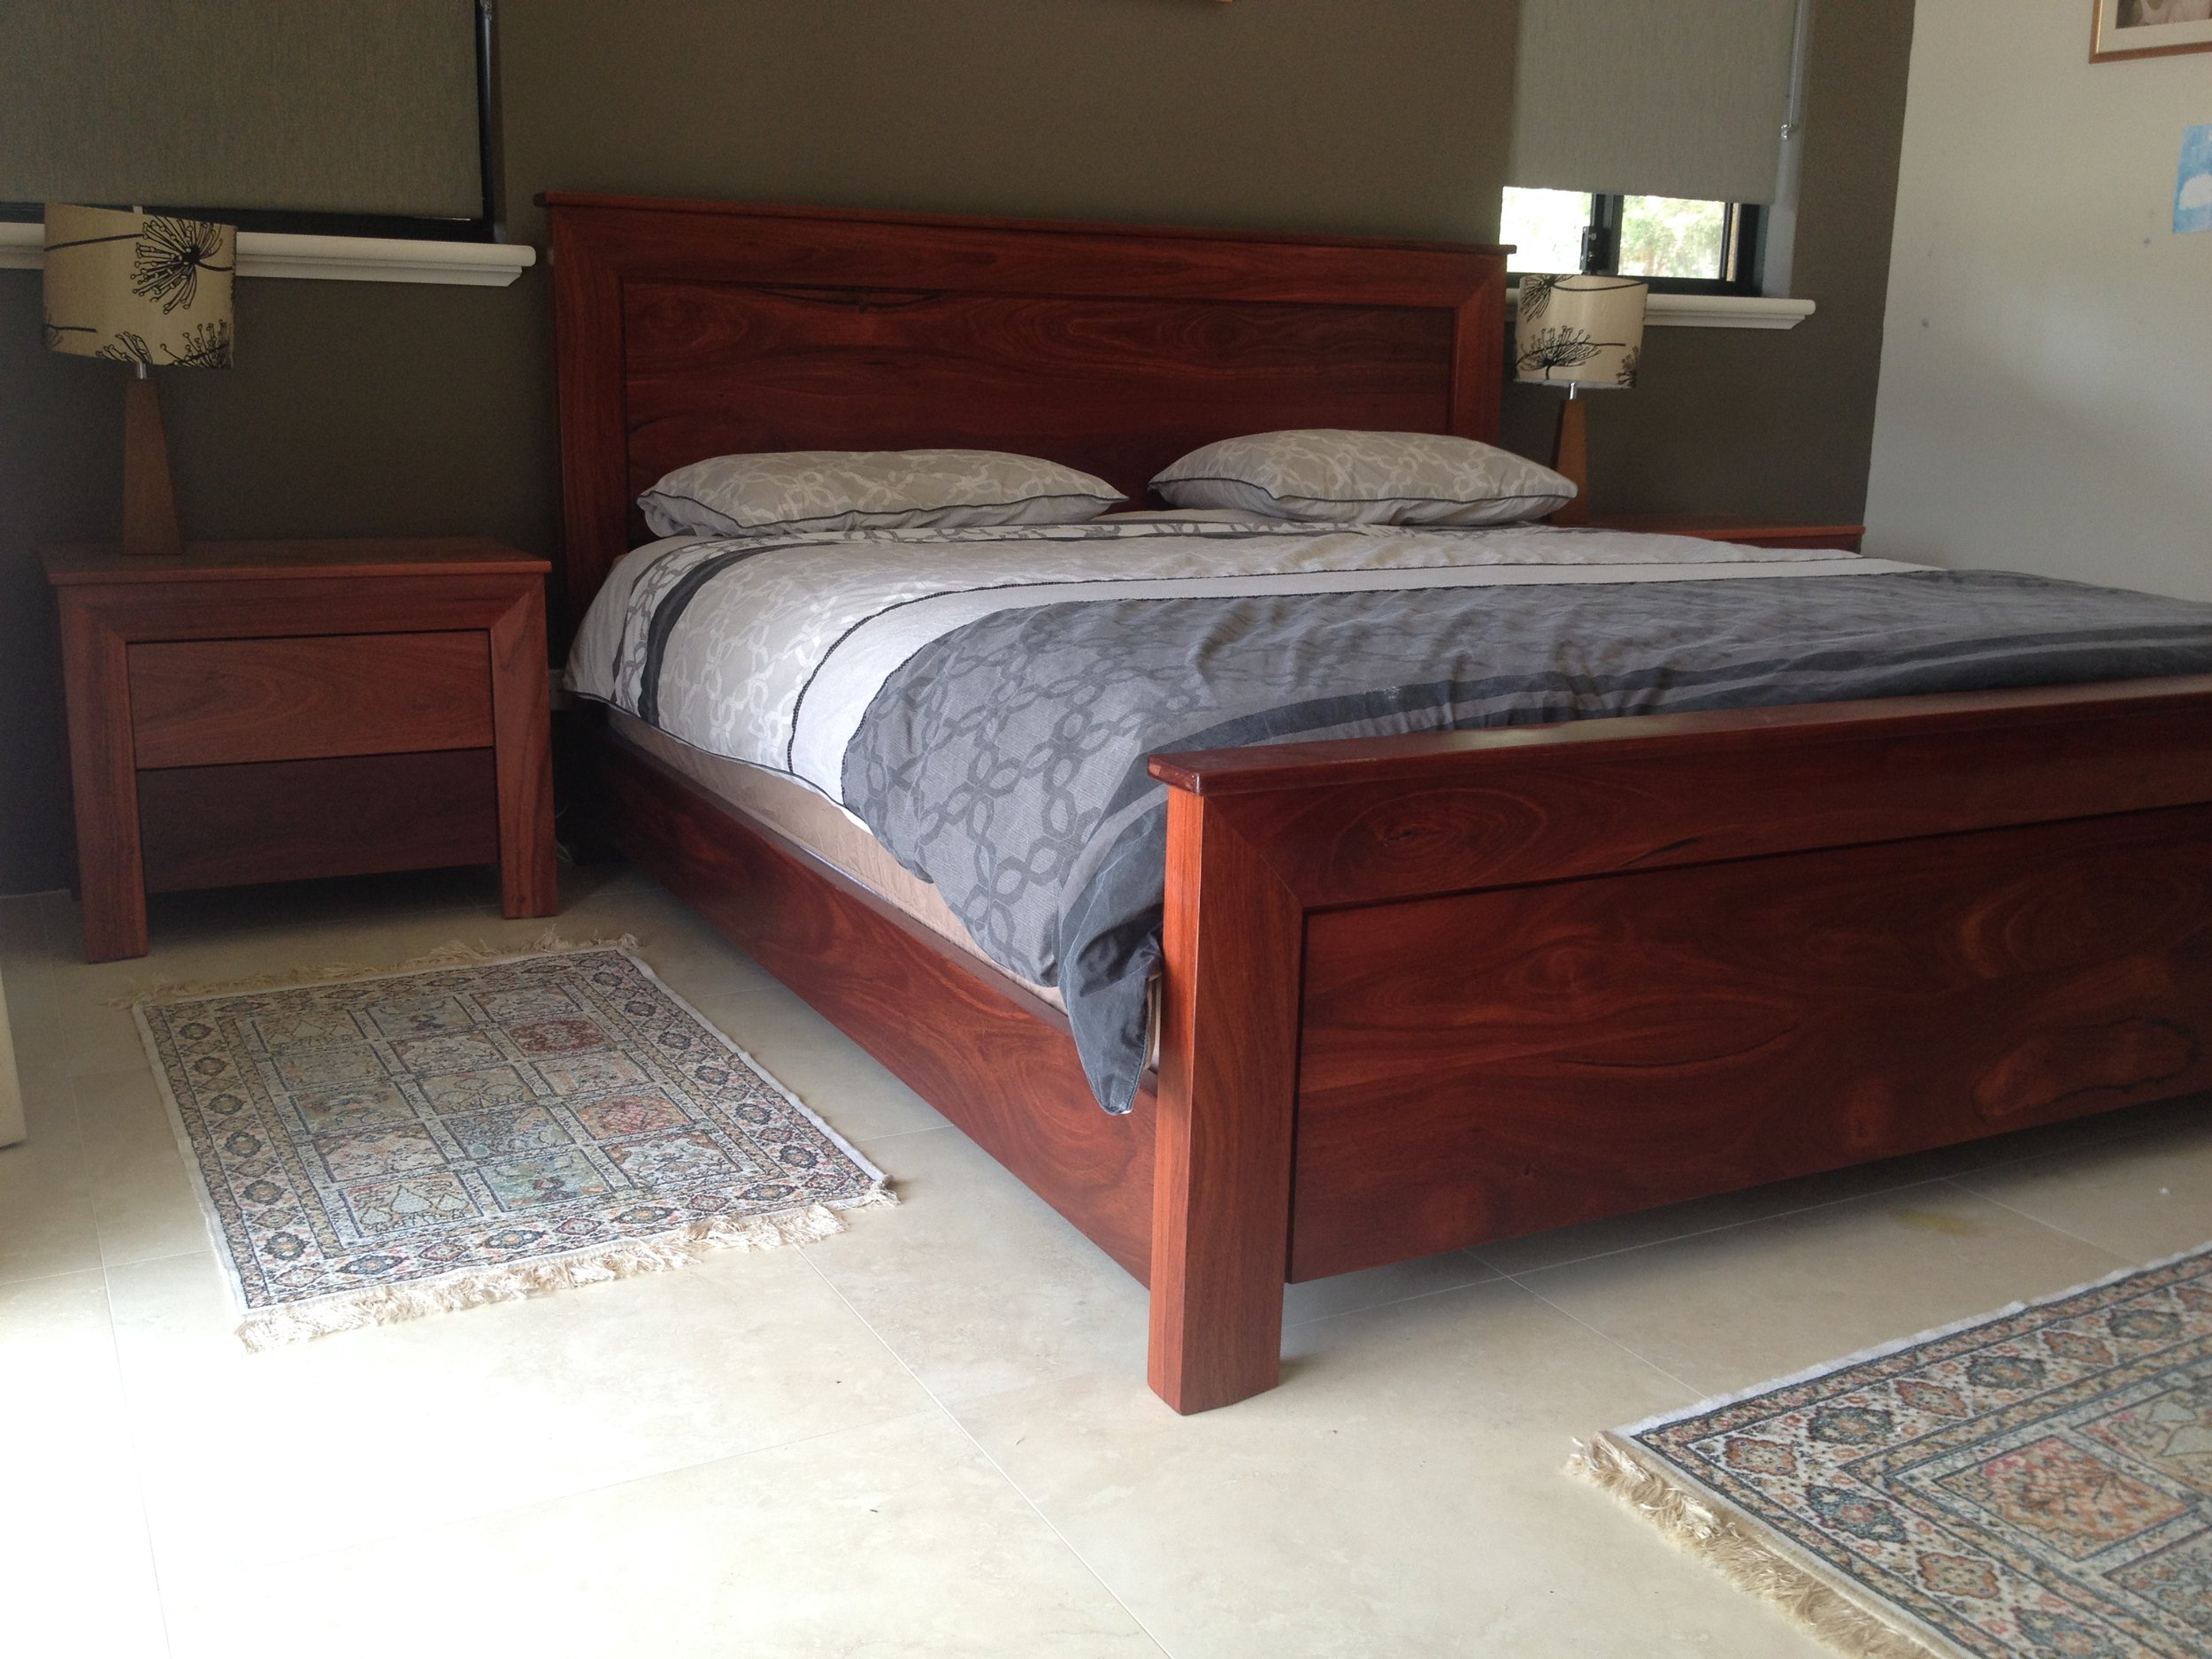  Jarrah King sized bed with solid timber throughout will last a lifetime. Bedsides and tall boys are made to match 